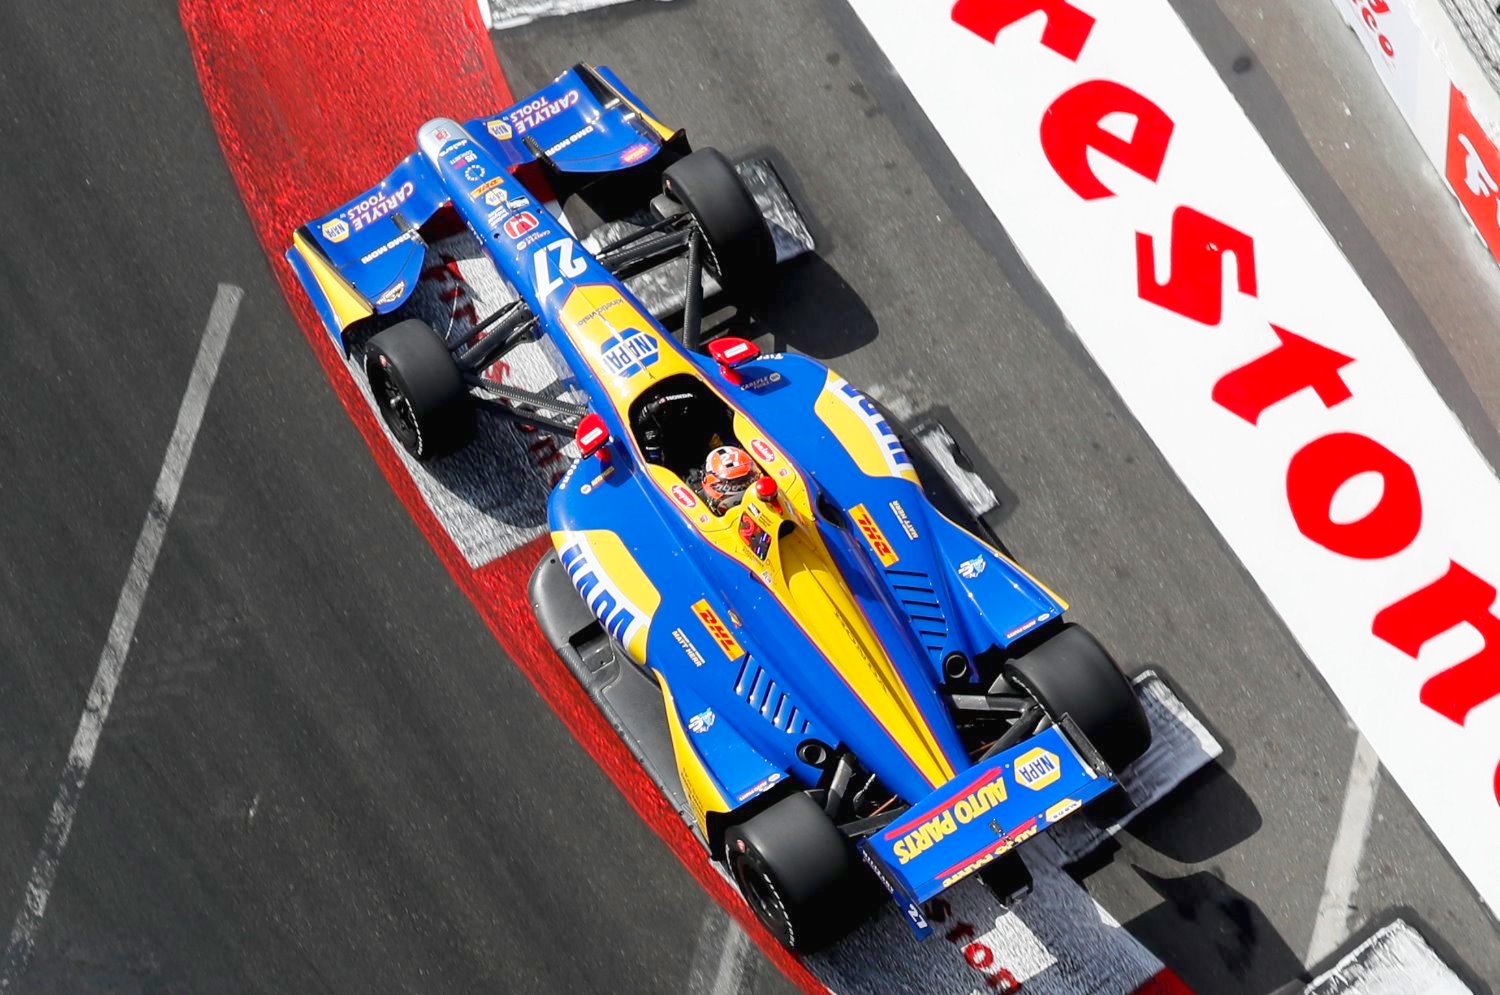 Alexander Rossi fastest in hot greasy conditions